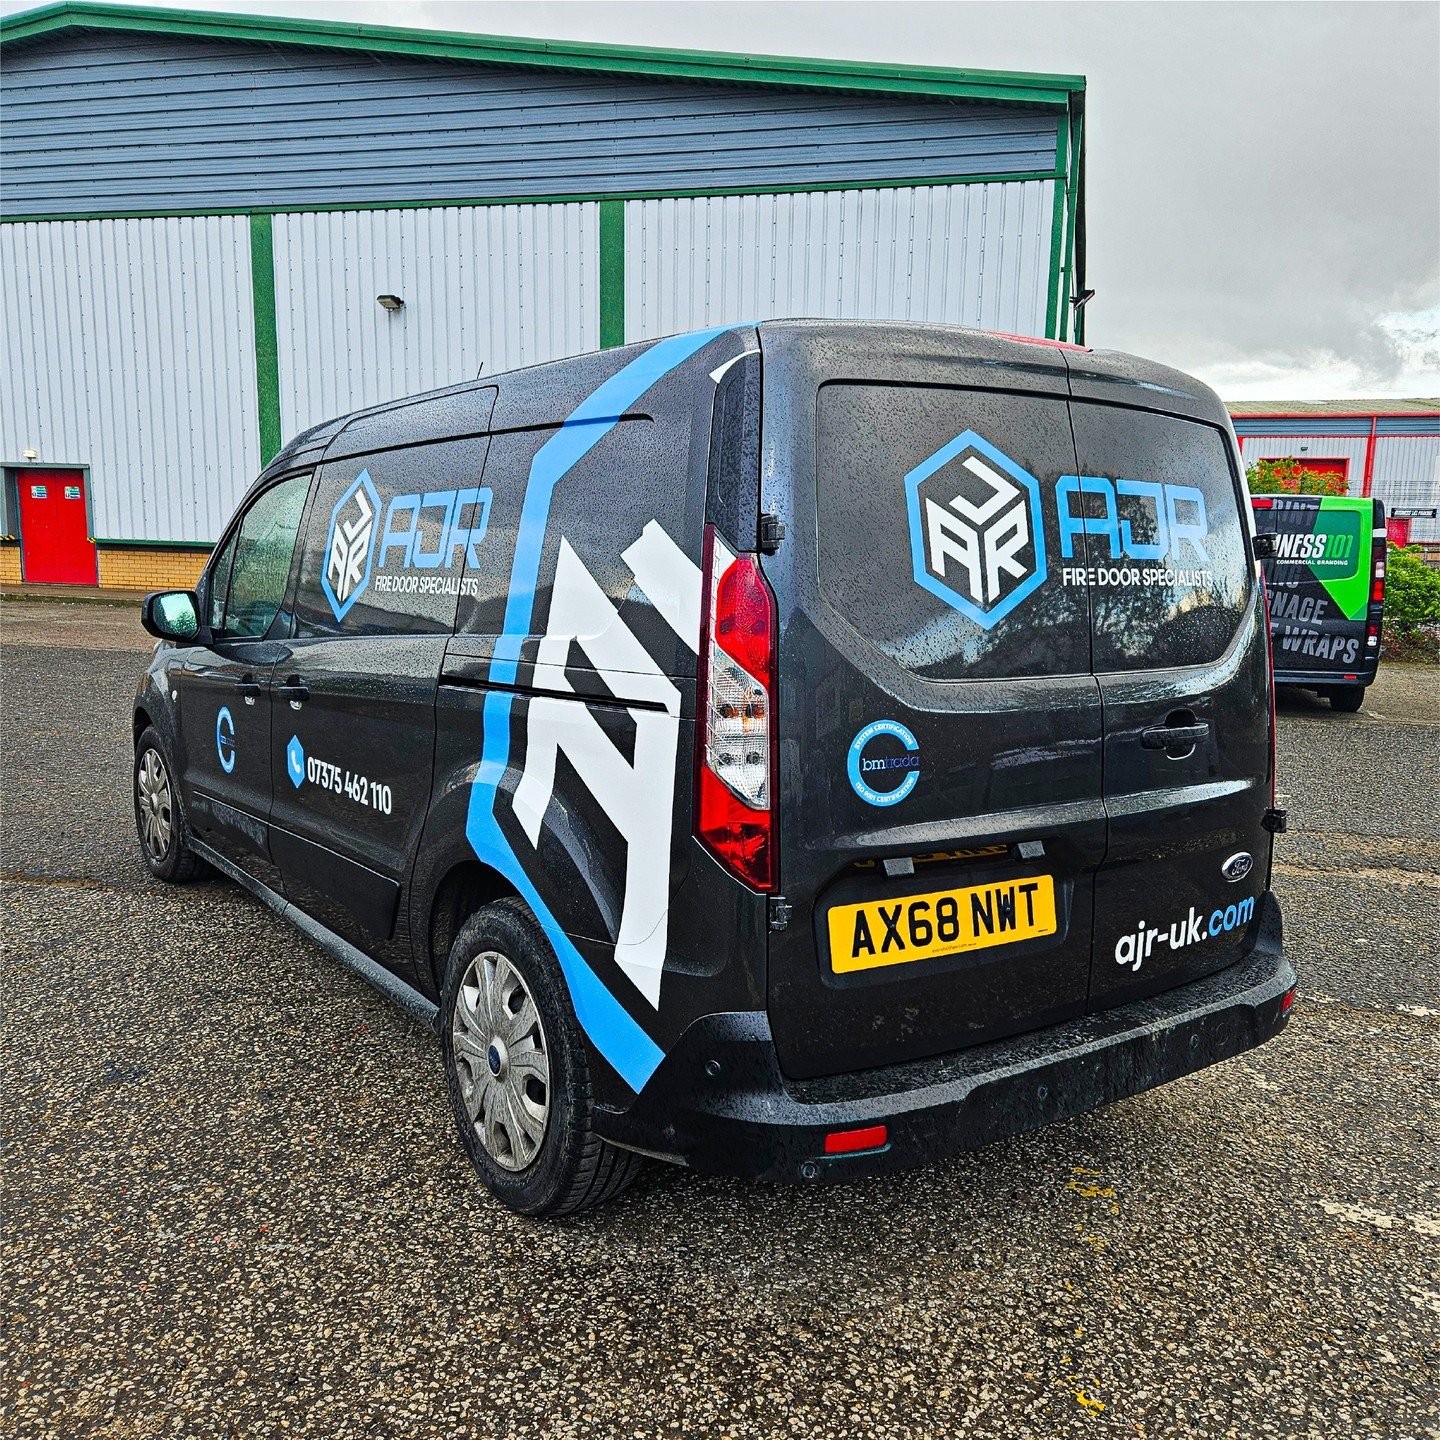 Take a look at the brand refresh and vehicle livery we've recently completed for AJR Joinery 🔥